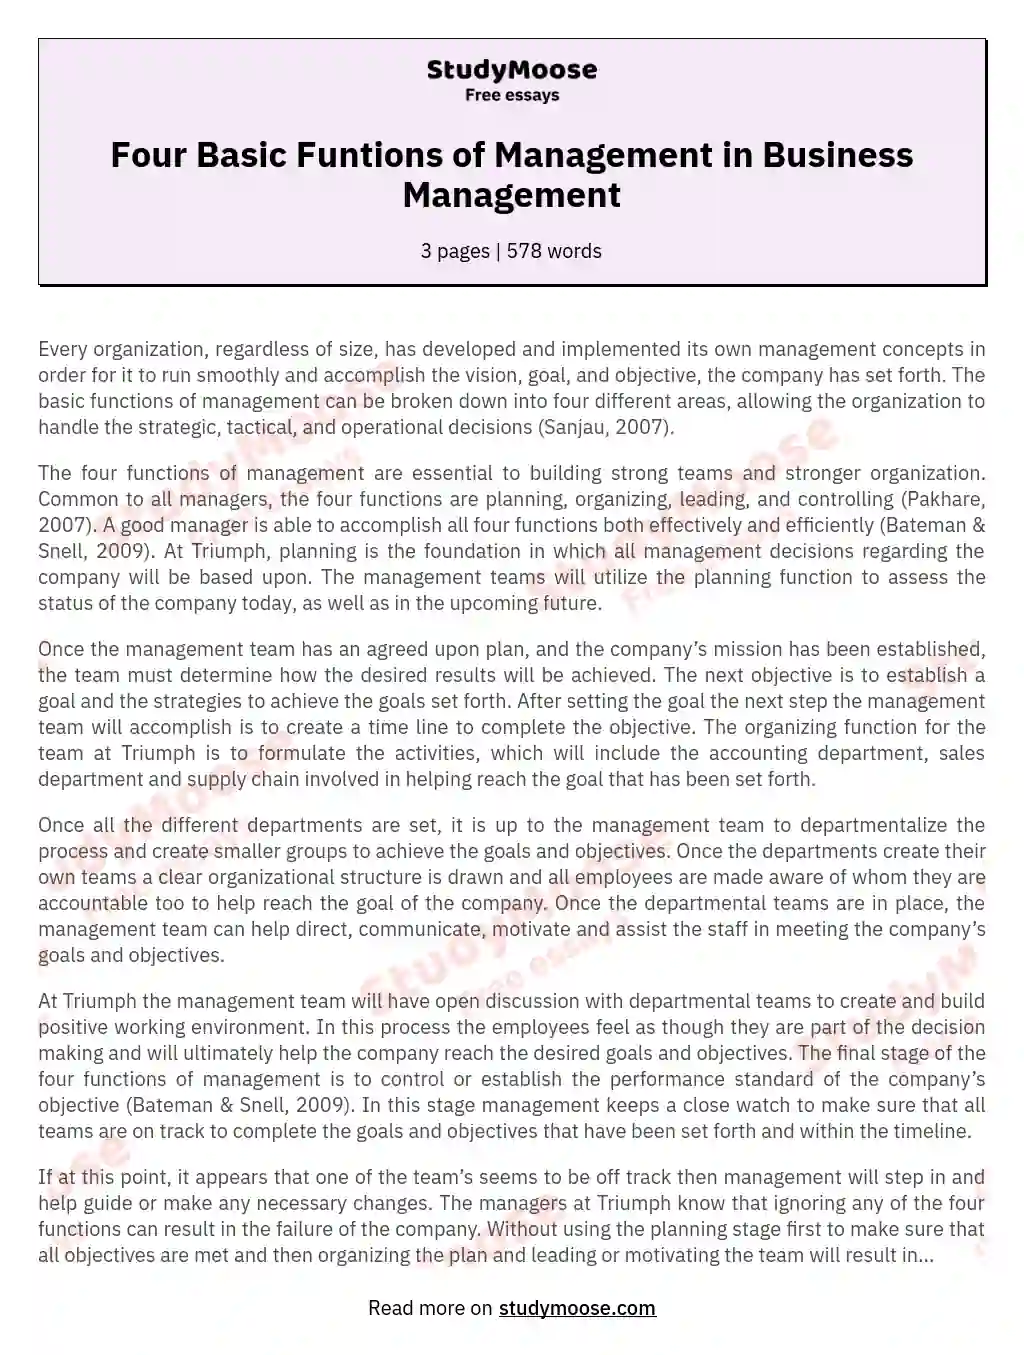 Four Basic Funtions of Management in Business Management essay